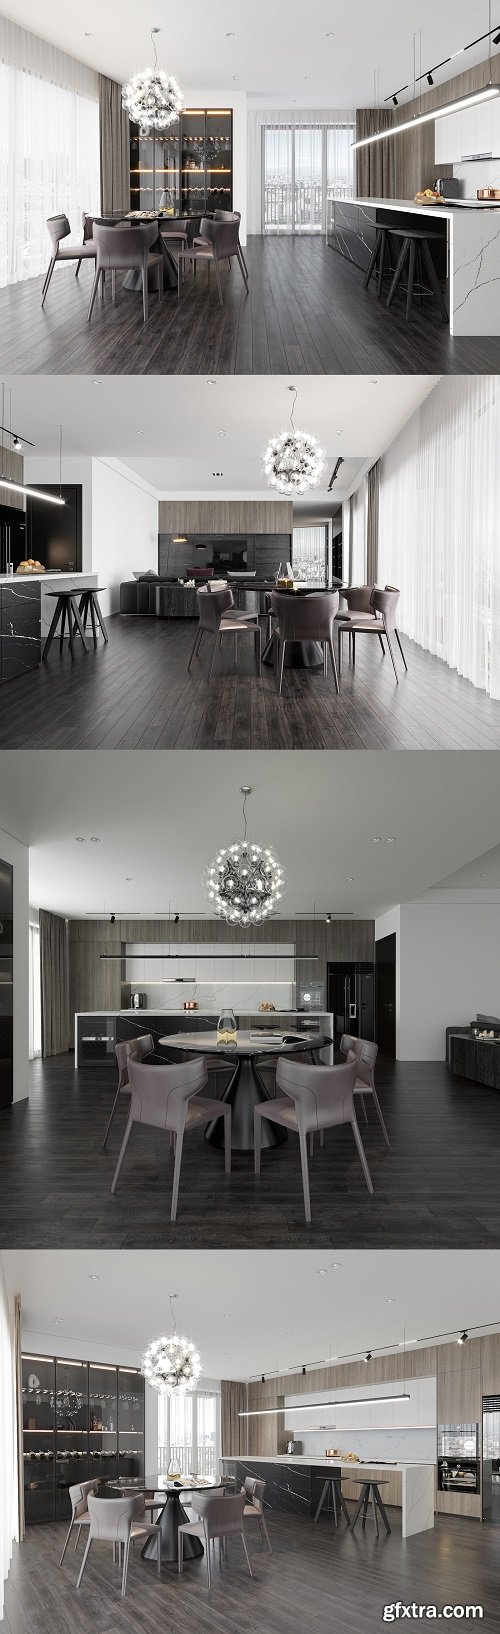 Penthouse Design Interior By Nguyen Duc Huy